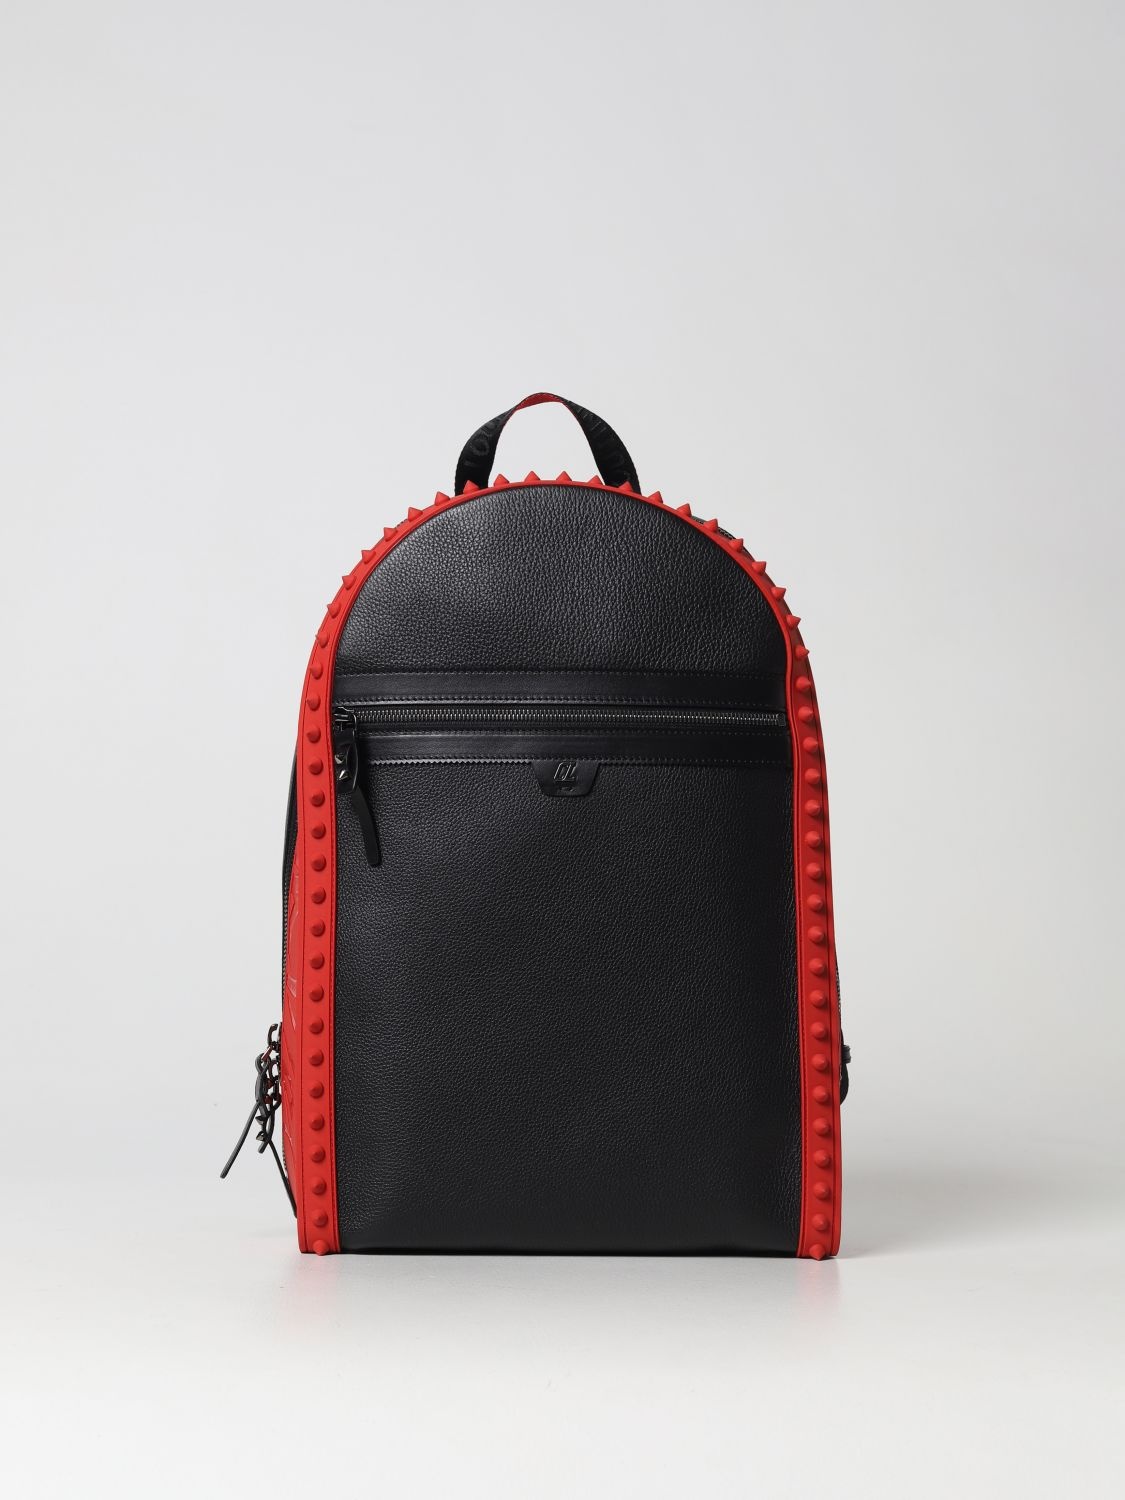 Christian Louboutin leather backpack - 1